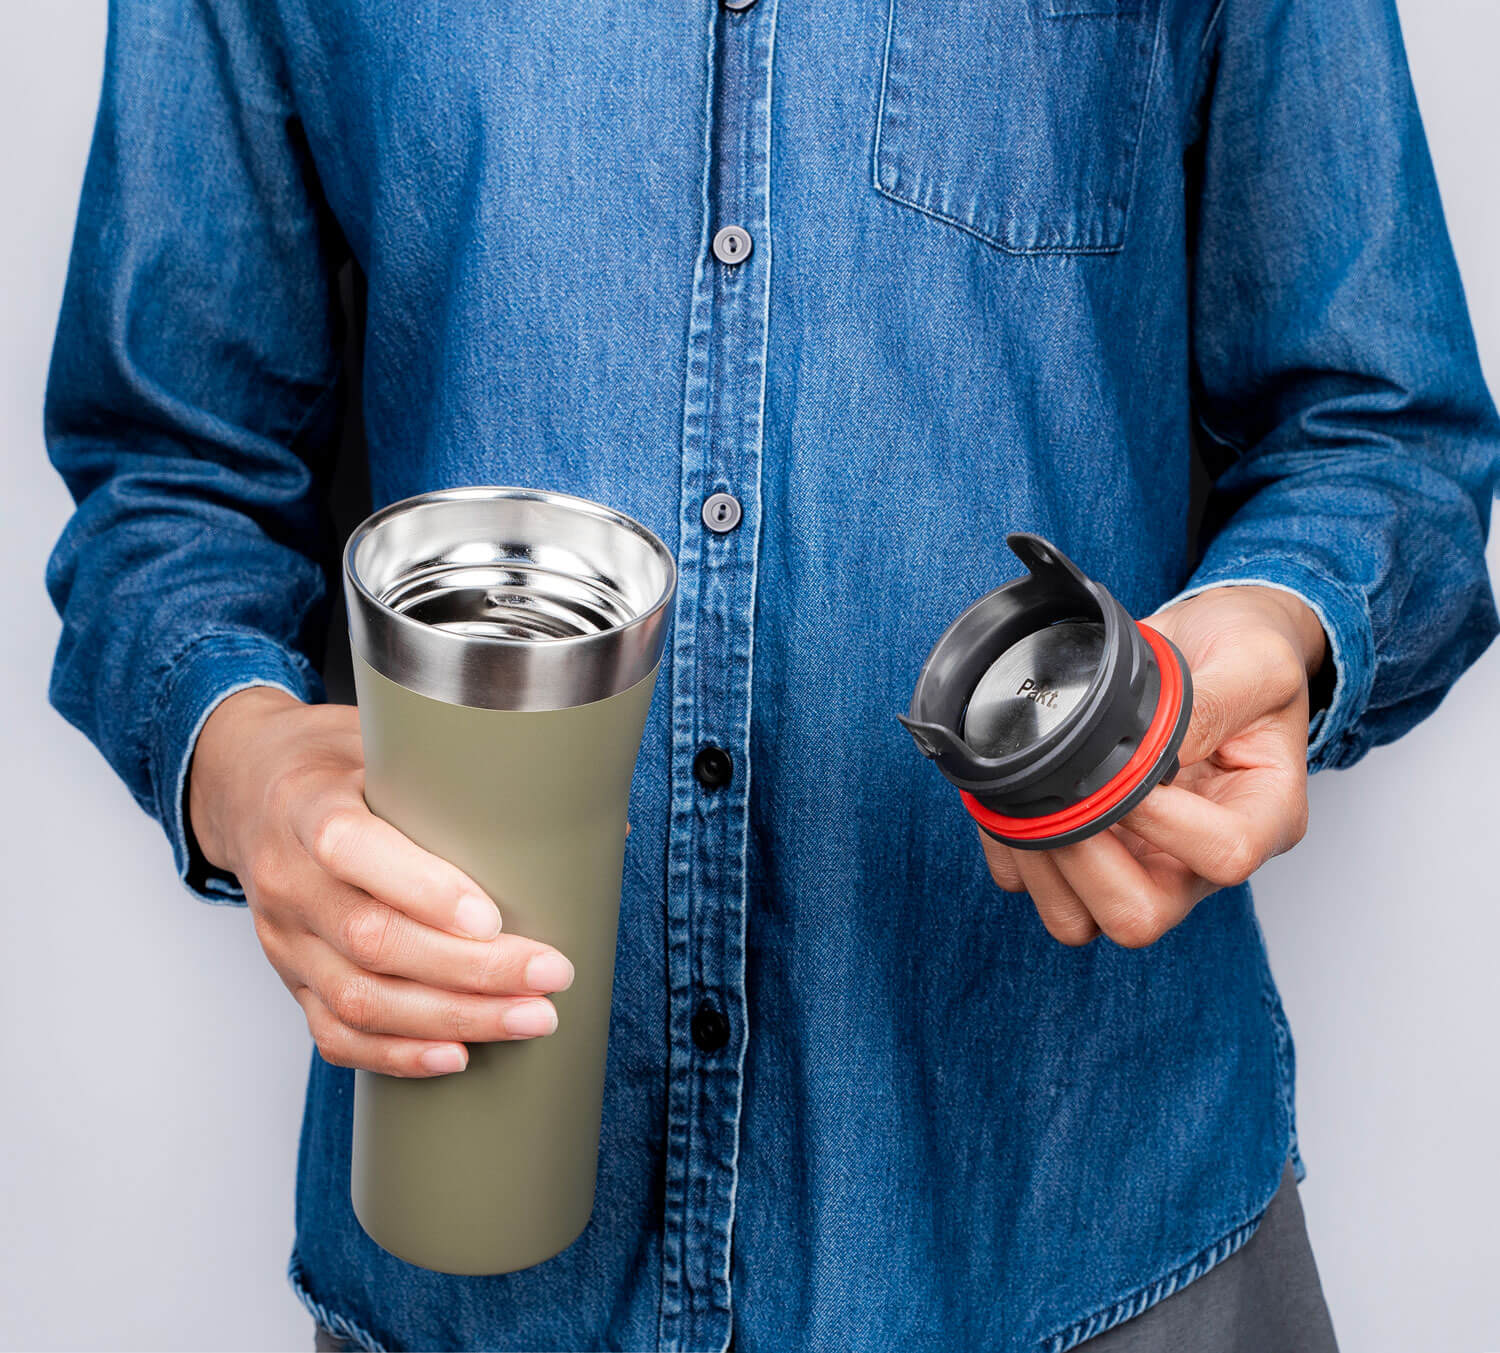 Thermos Stainless Steel Tumbler with 360 Drink Lid - Stainless Steel - 16 oz.